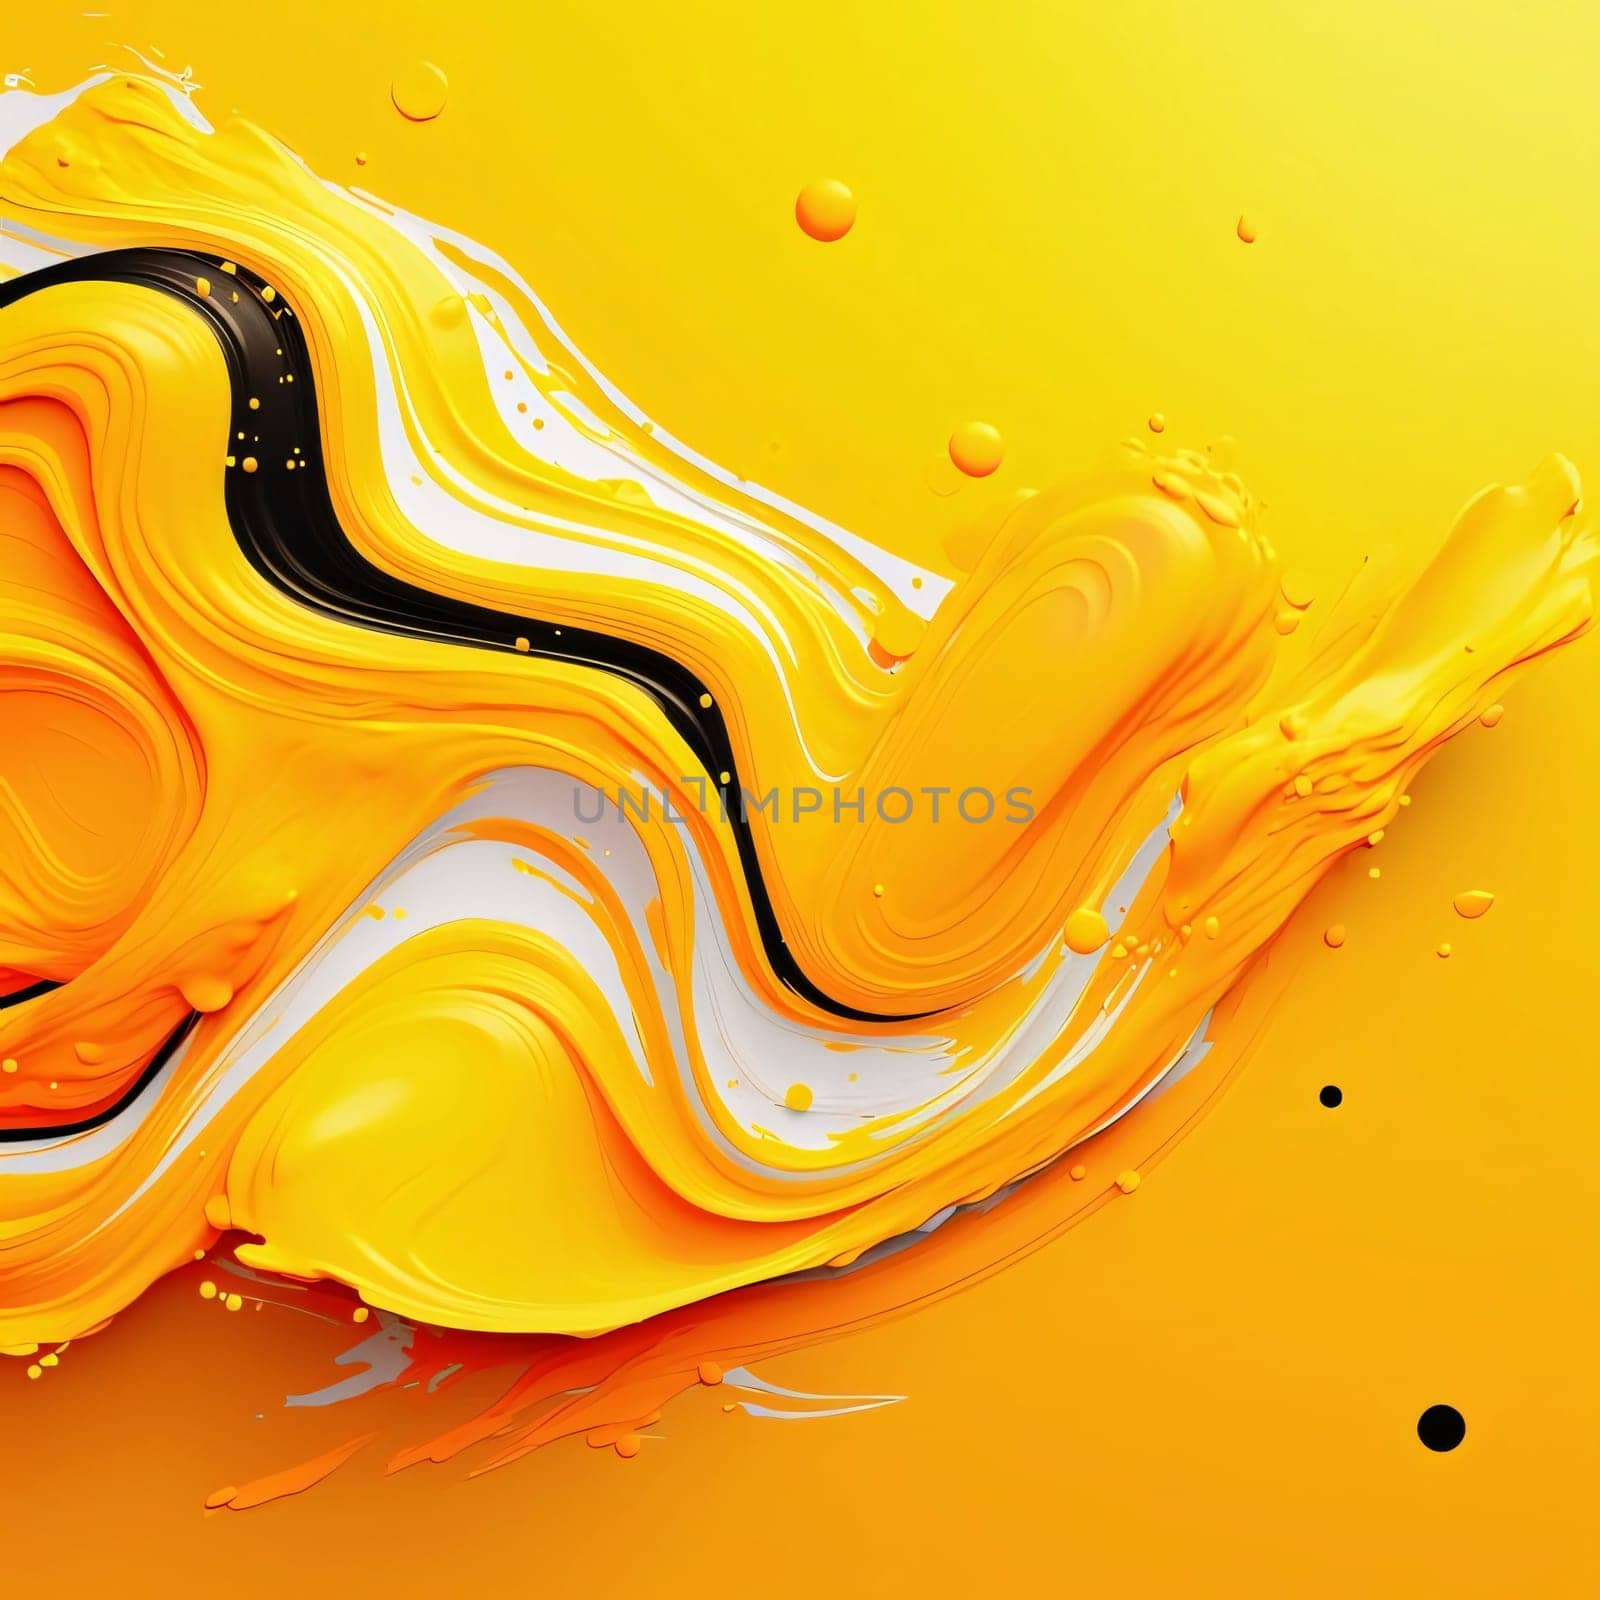 Abstract background design: 3d render, abstract background with yellow and orange paint splashes